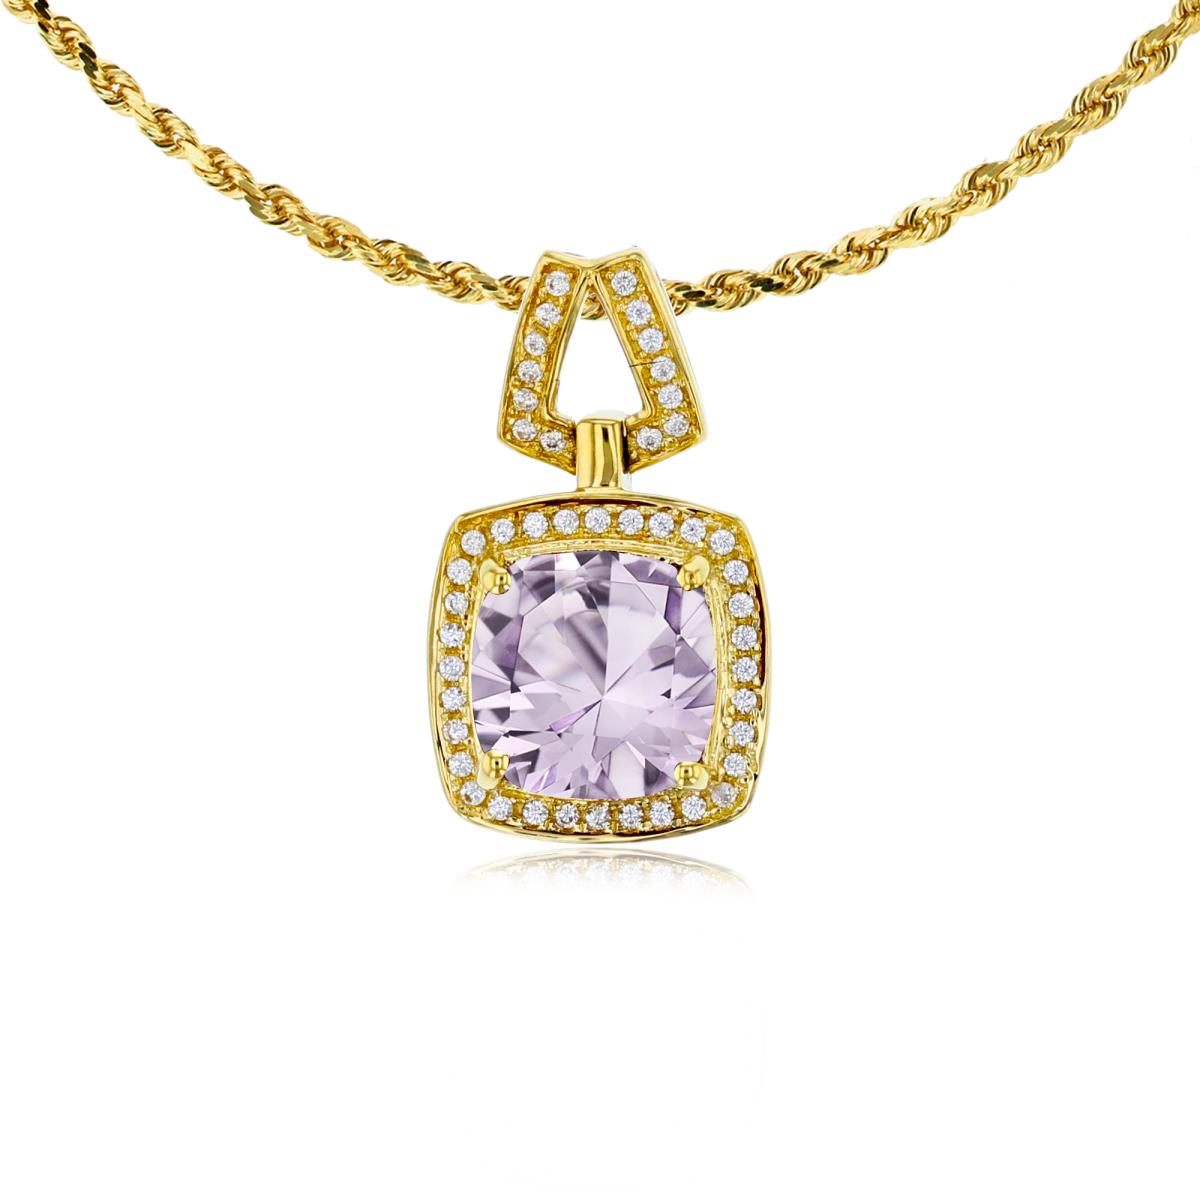 14K Yellow Gold 7mm Cushion Rose De France & 0.10 CTTW Diamond Halo 18" Rope Chain Necklace